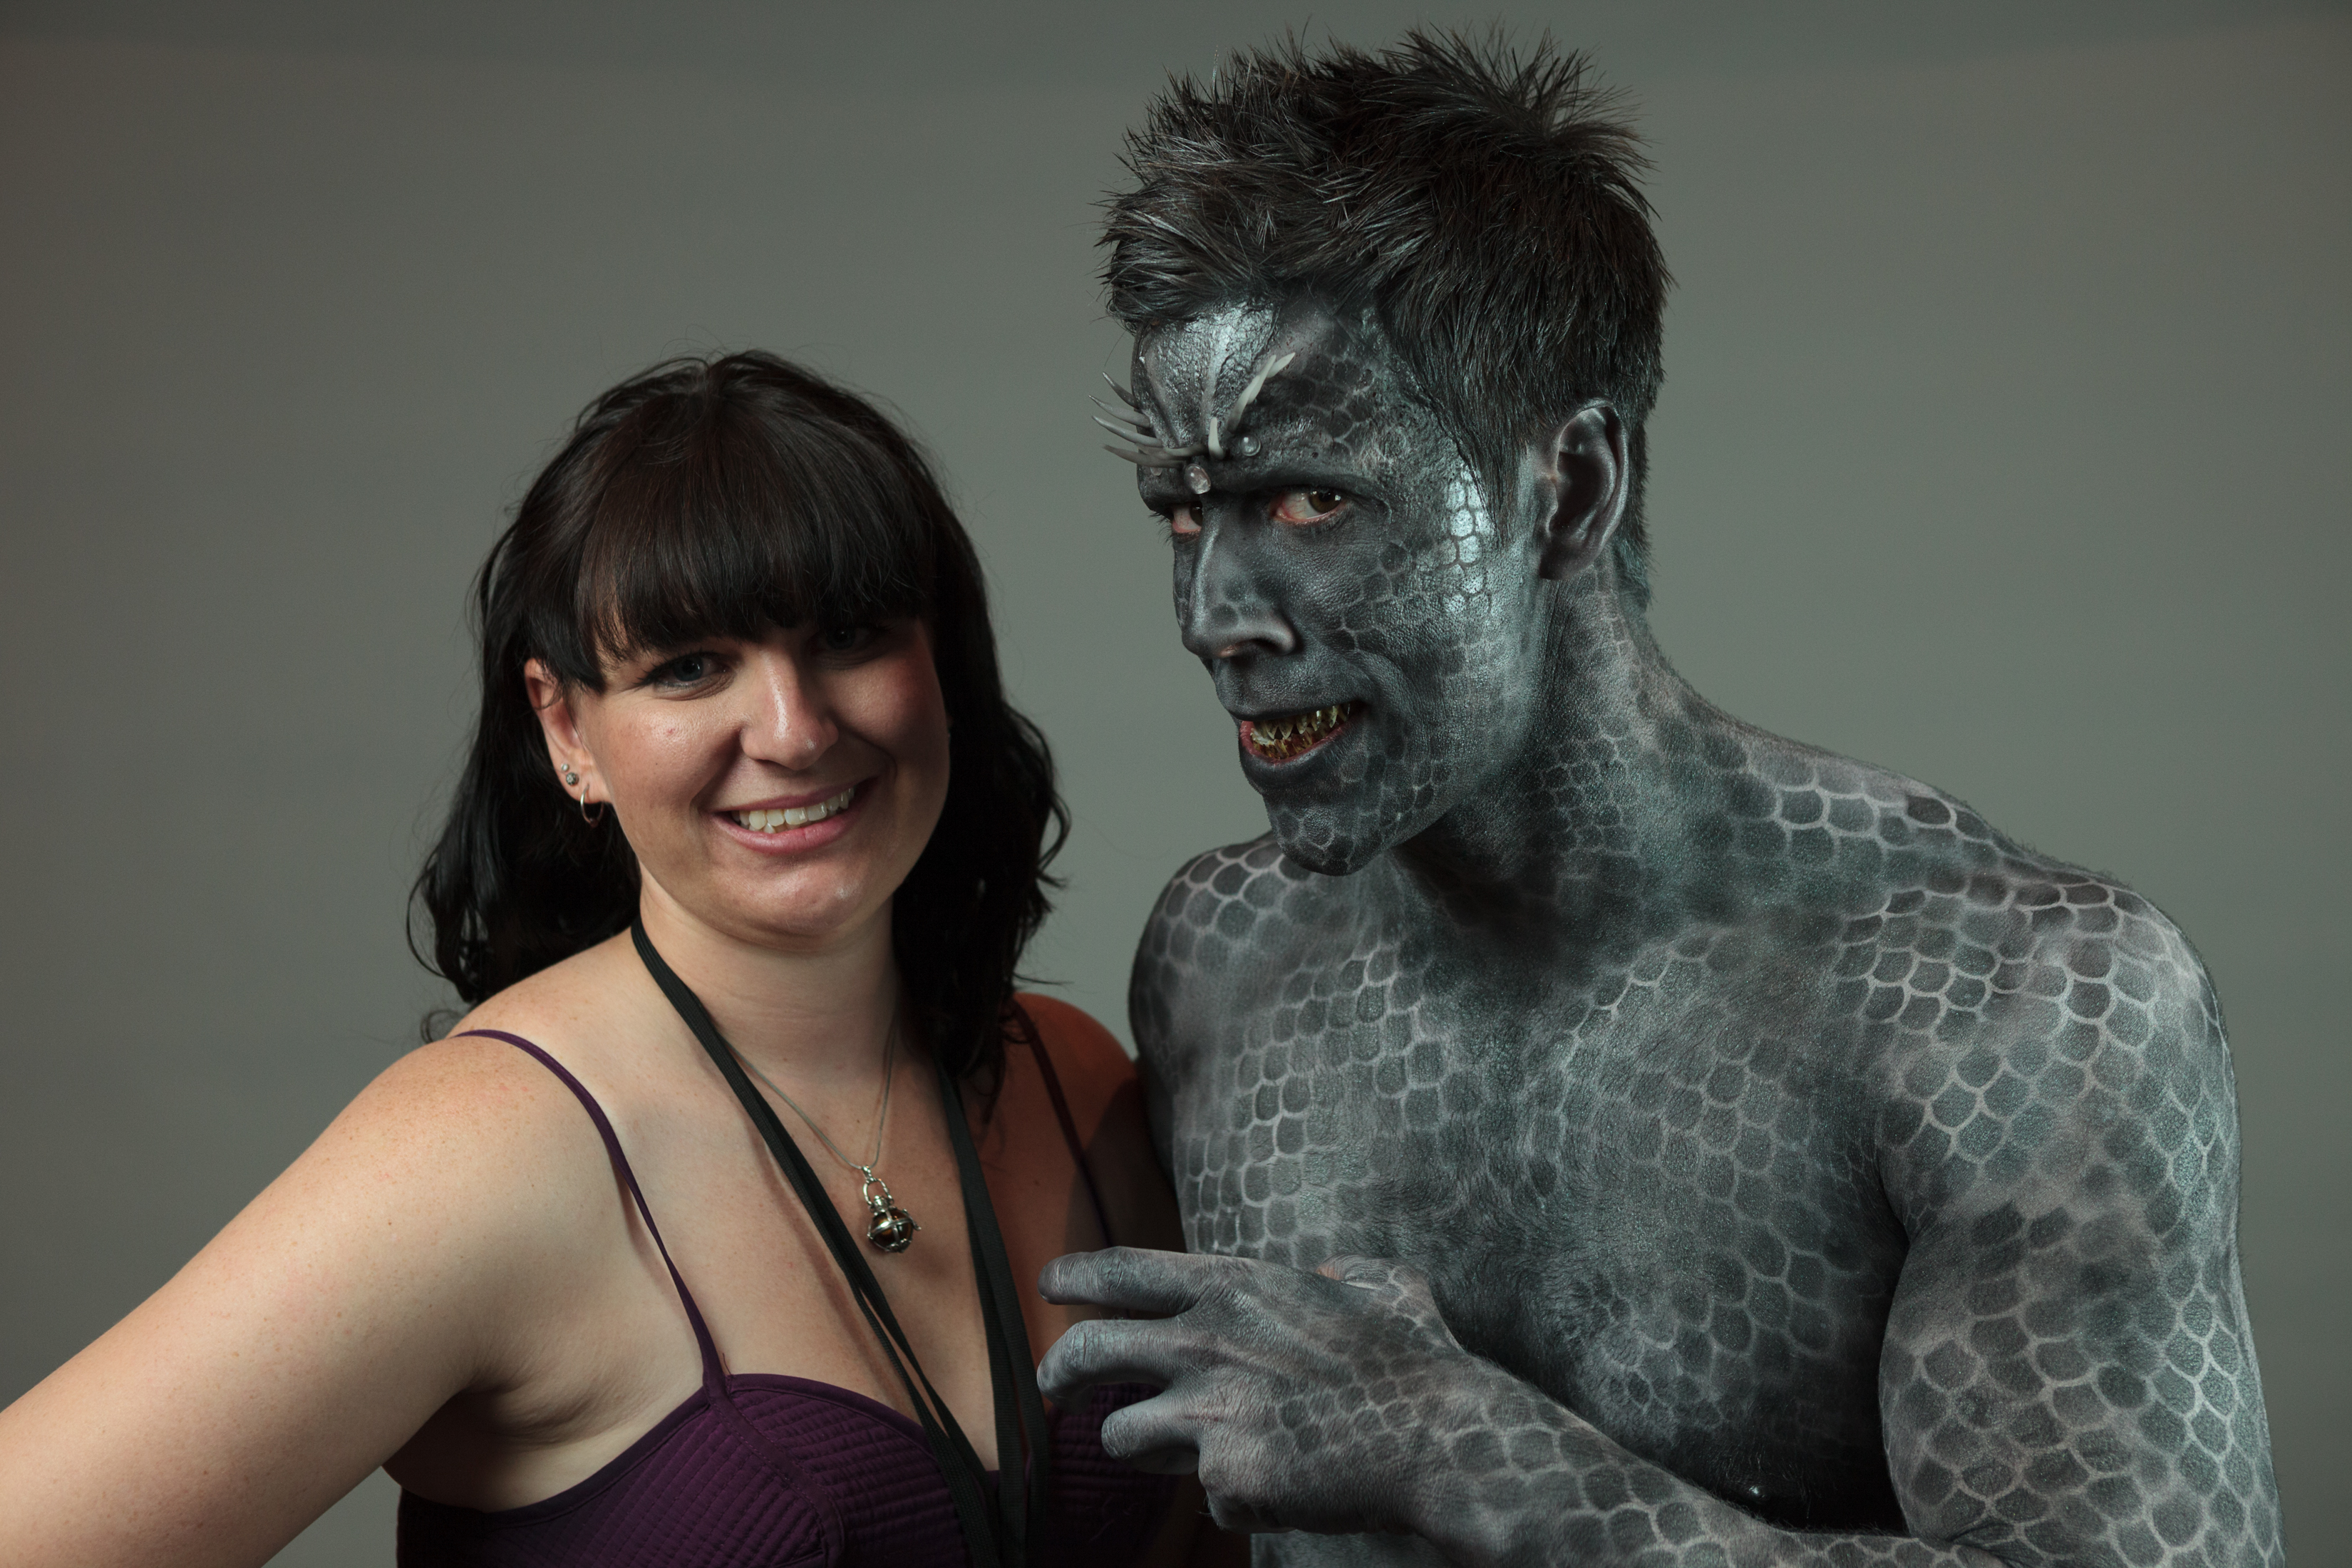 IMATS 2012 with Meredith Johns